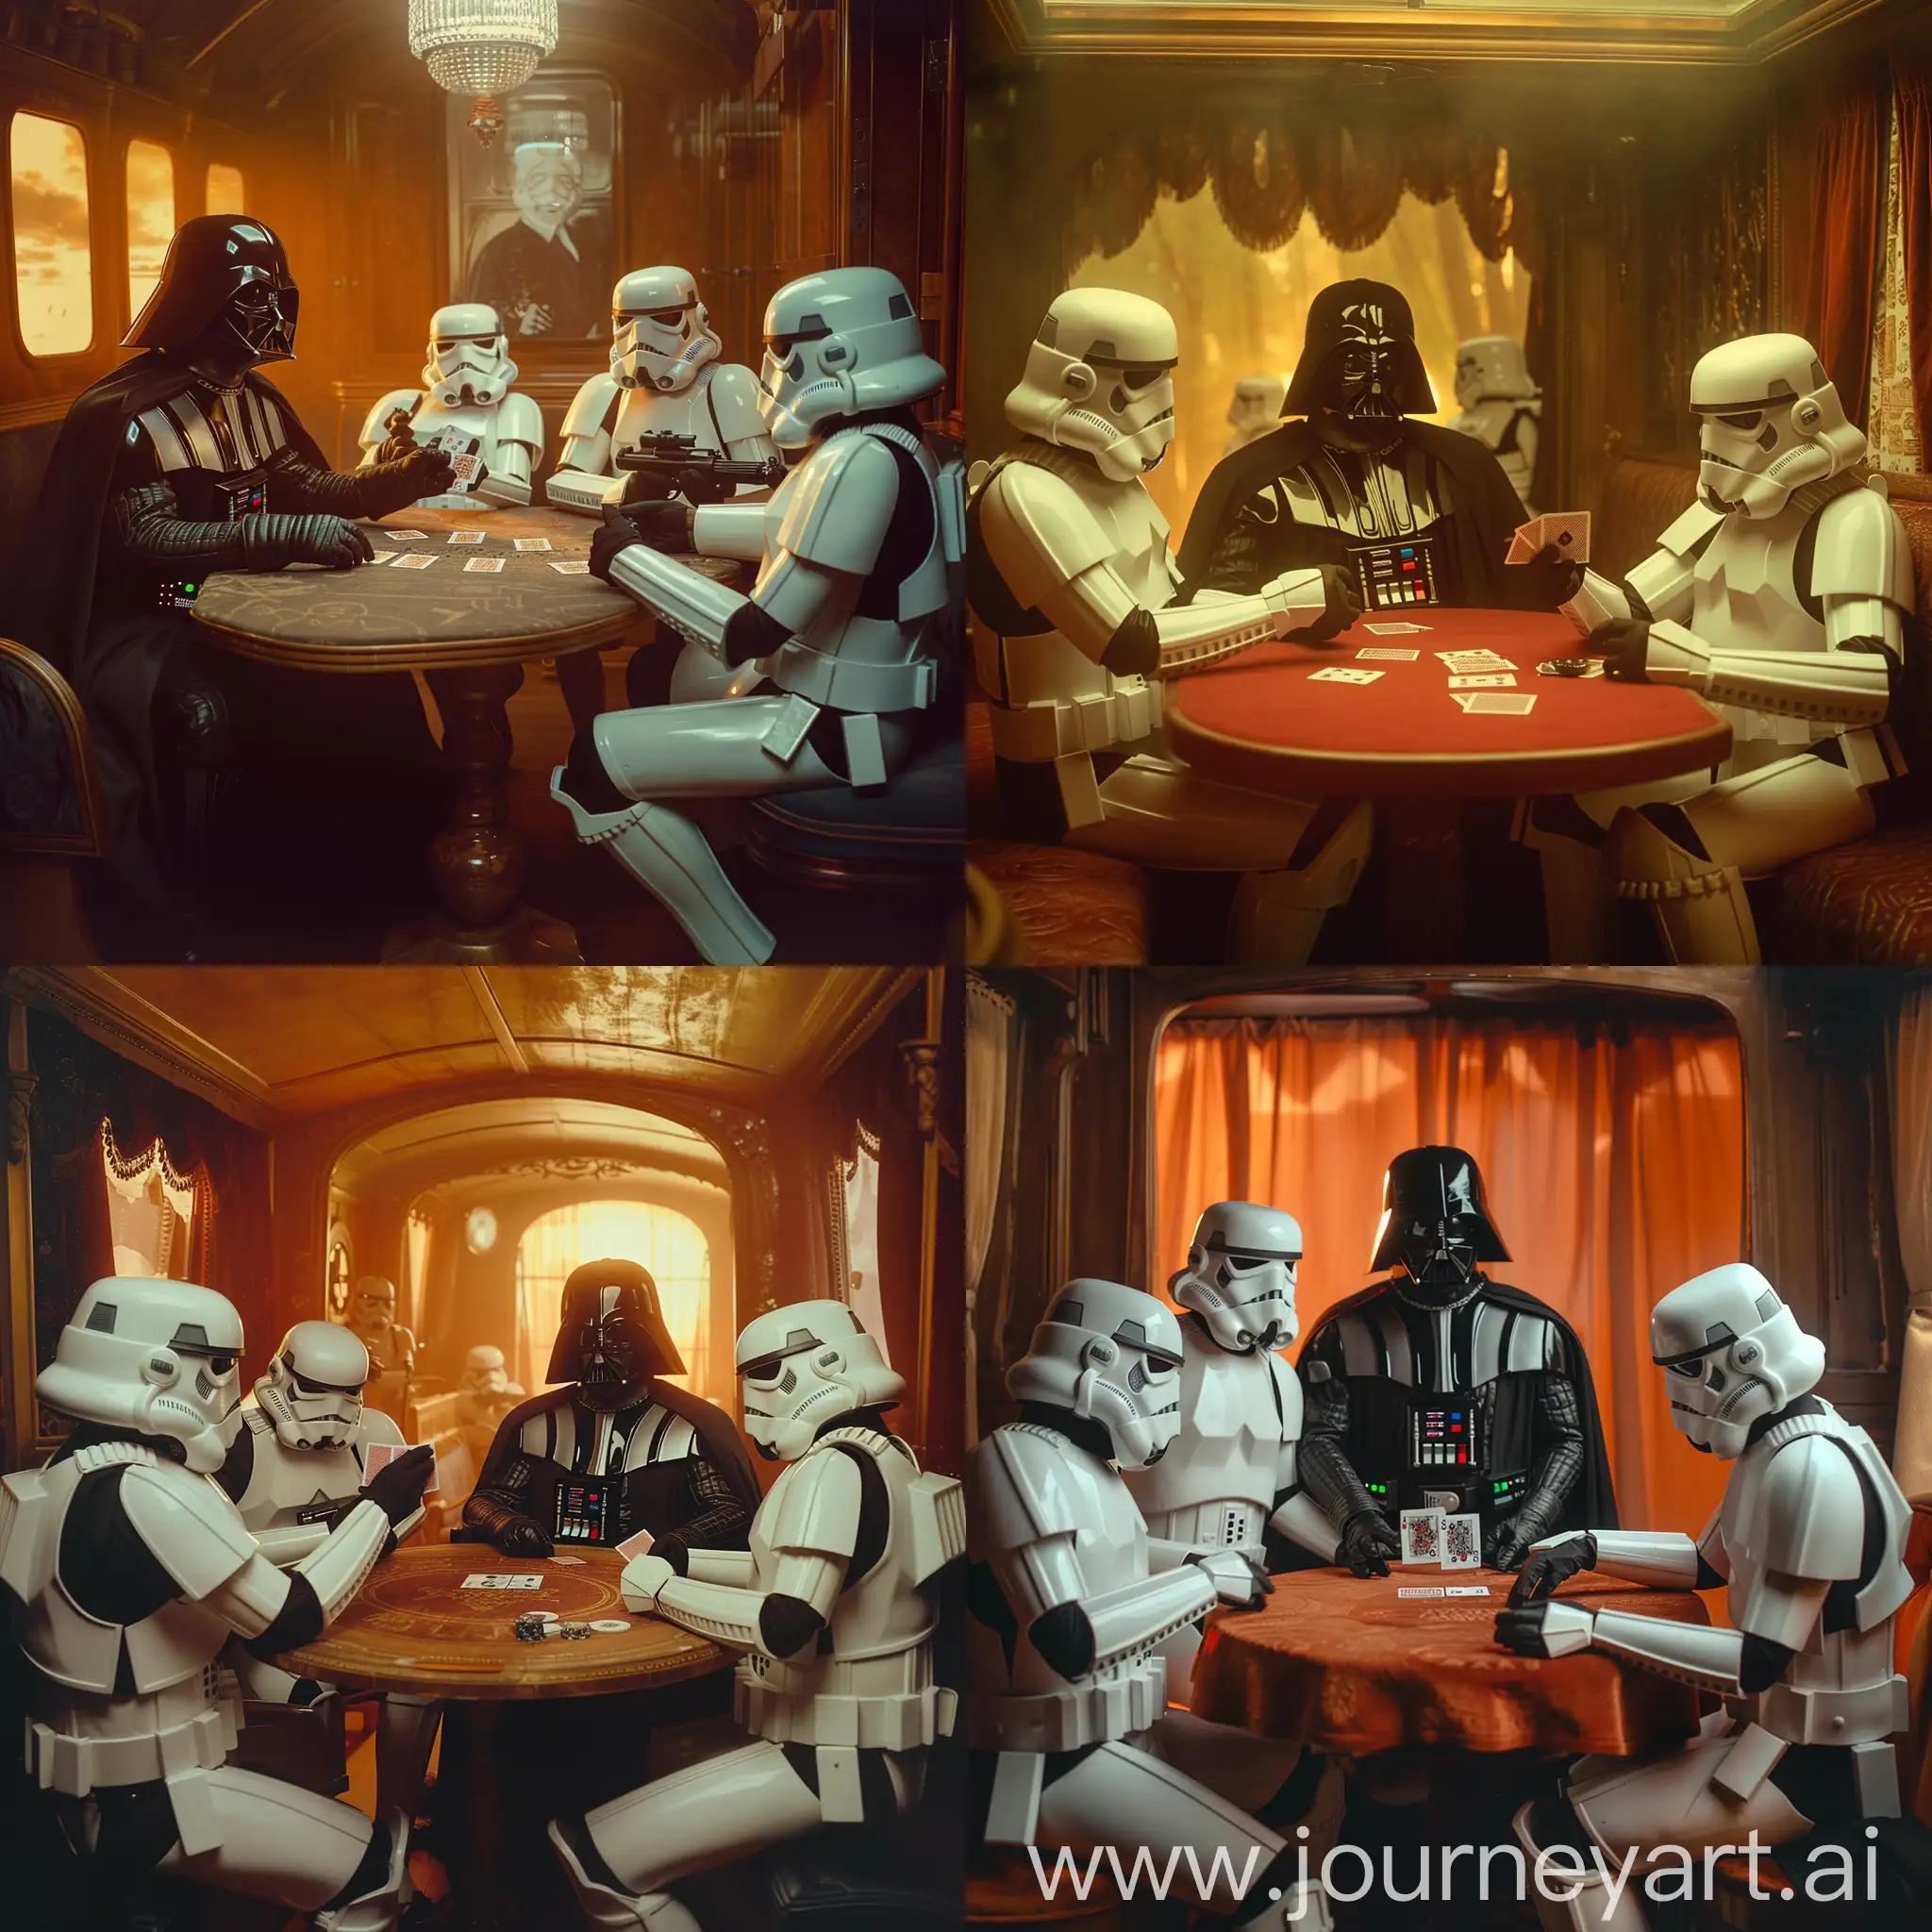 Darth Vader and stormtroopers from Star Wars are playing cards at a table in a compartment of a Russian carriage, soft warm light, film photo, realistic